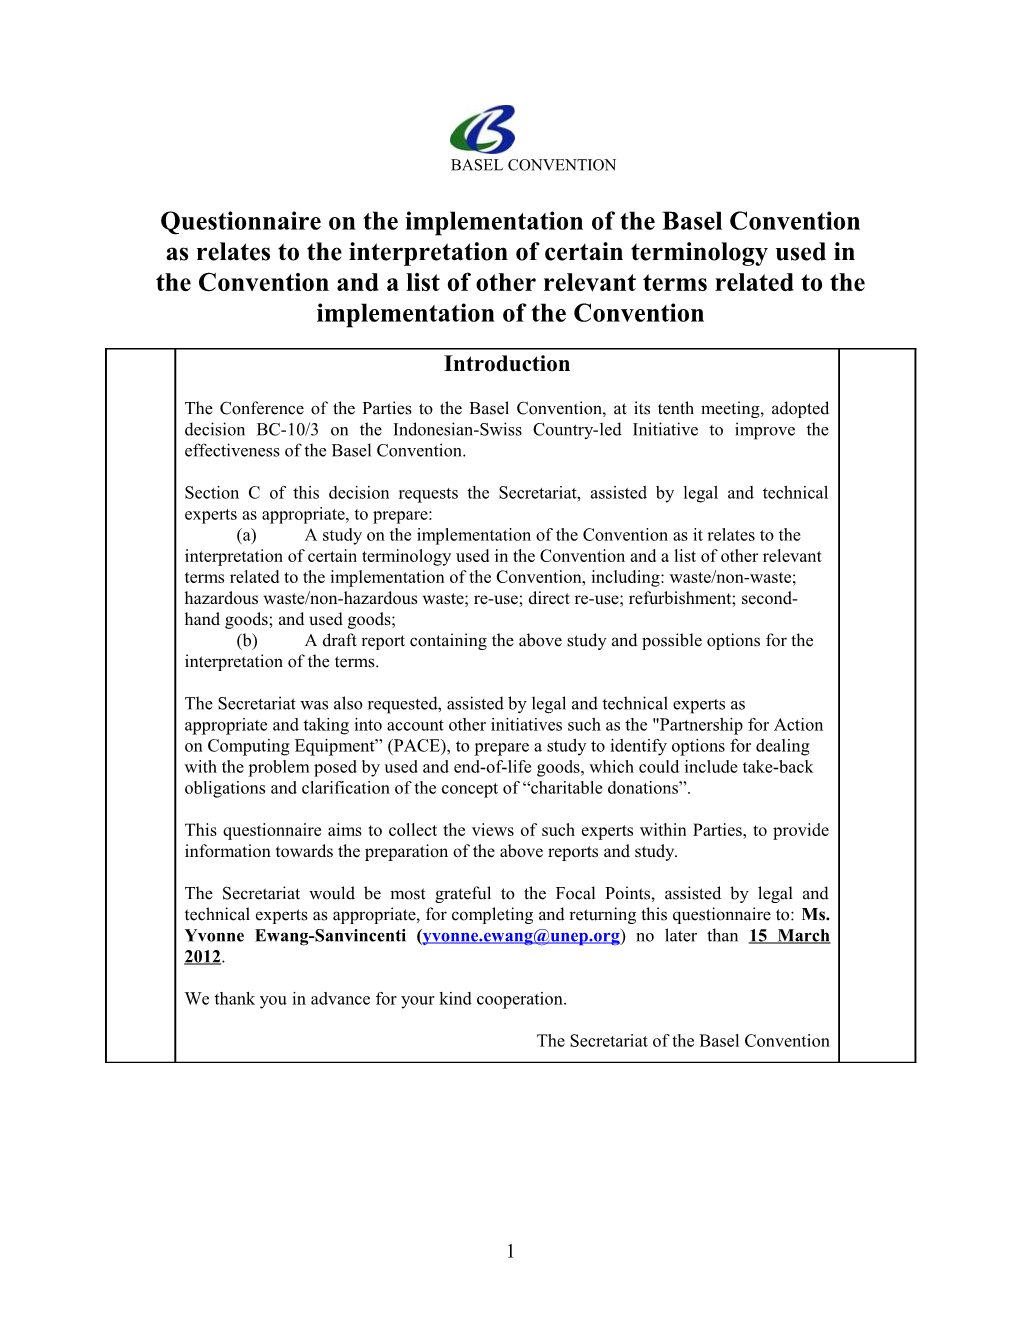 Questionnaire on the Implementation of the Basel Convention As It Relates to the Interpretation